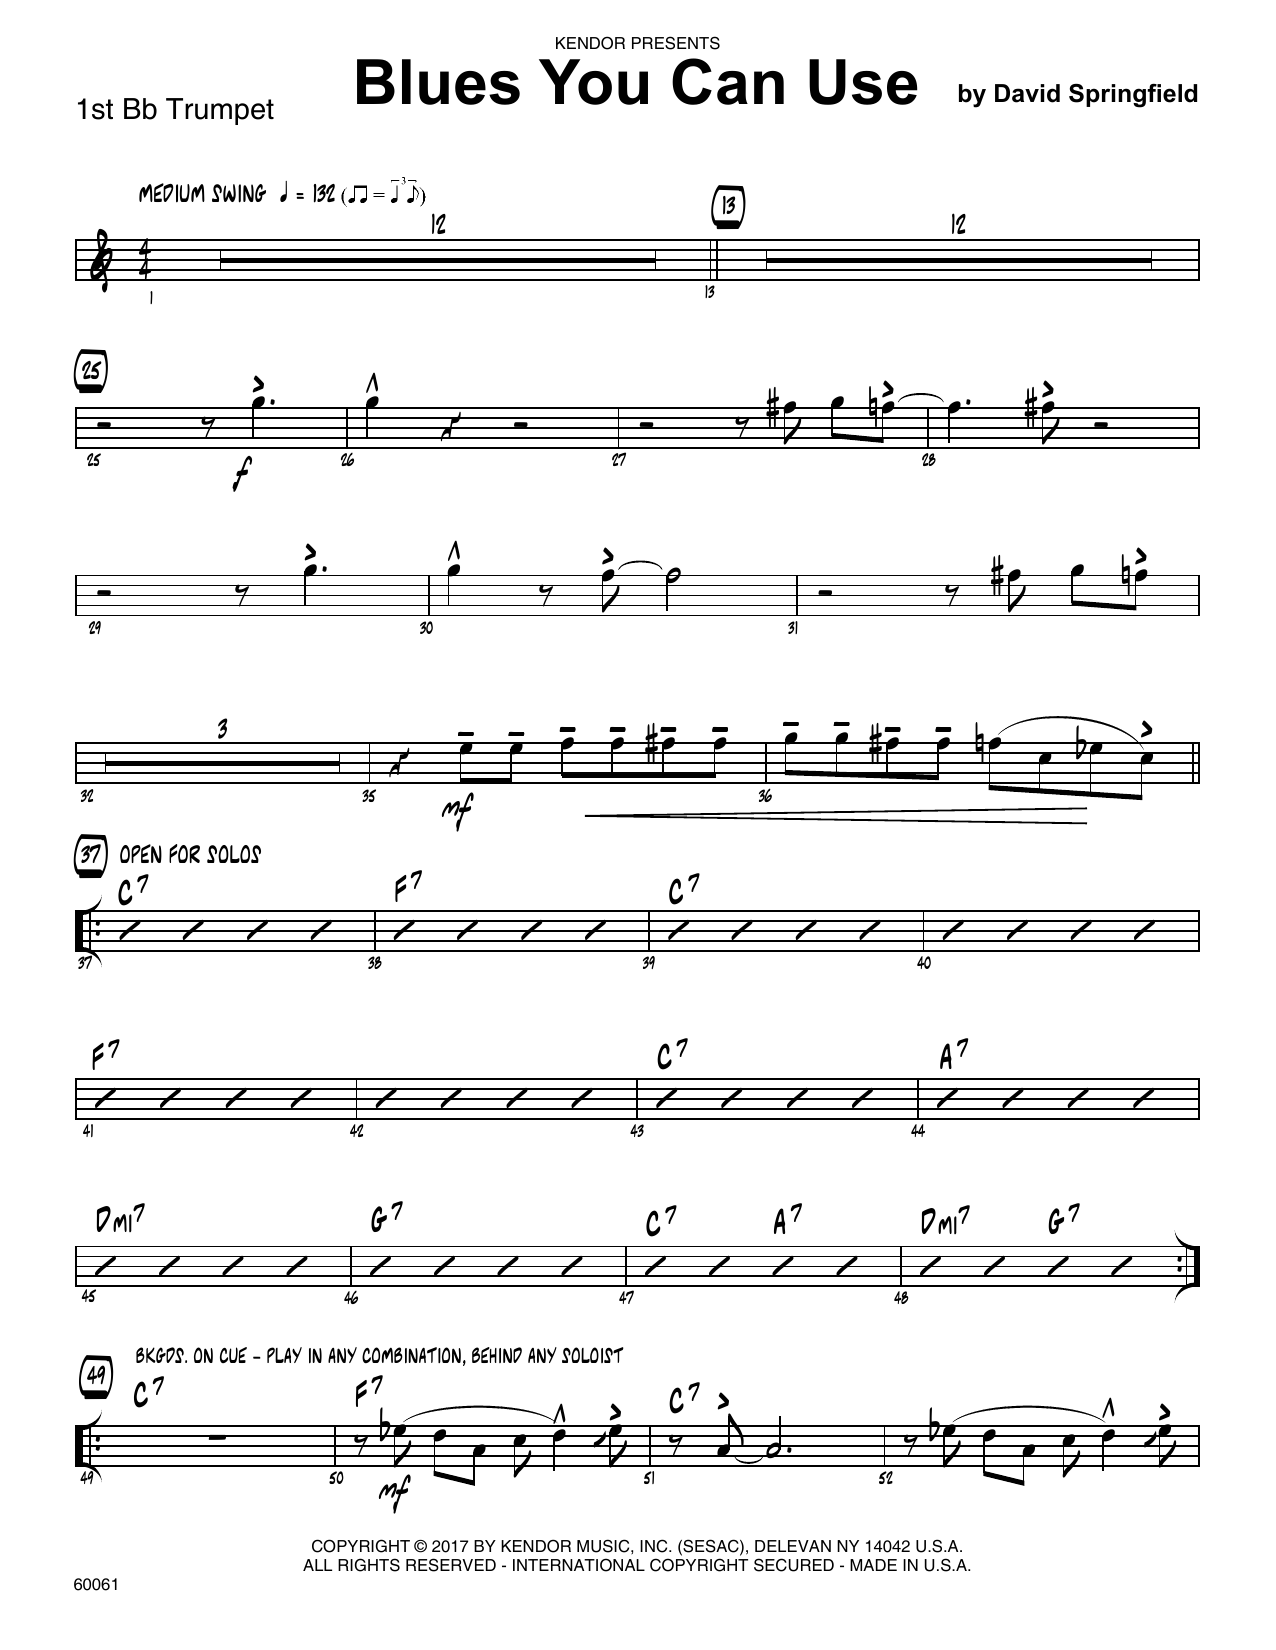 Download David Springfield Blues You Can Use - 1st Bb Trumpet sheet music and printable PDF score & Jazz music notes